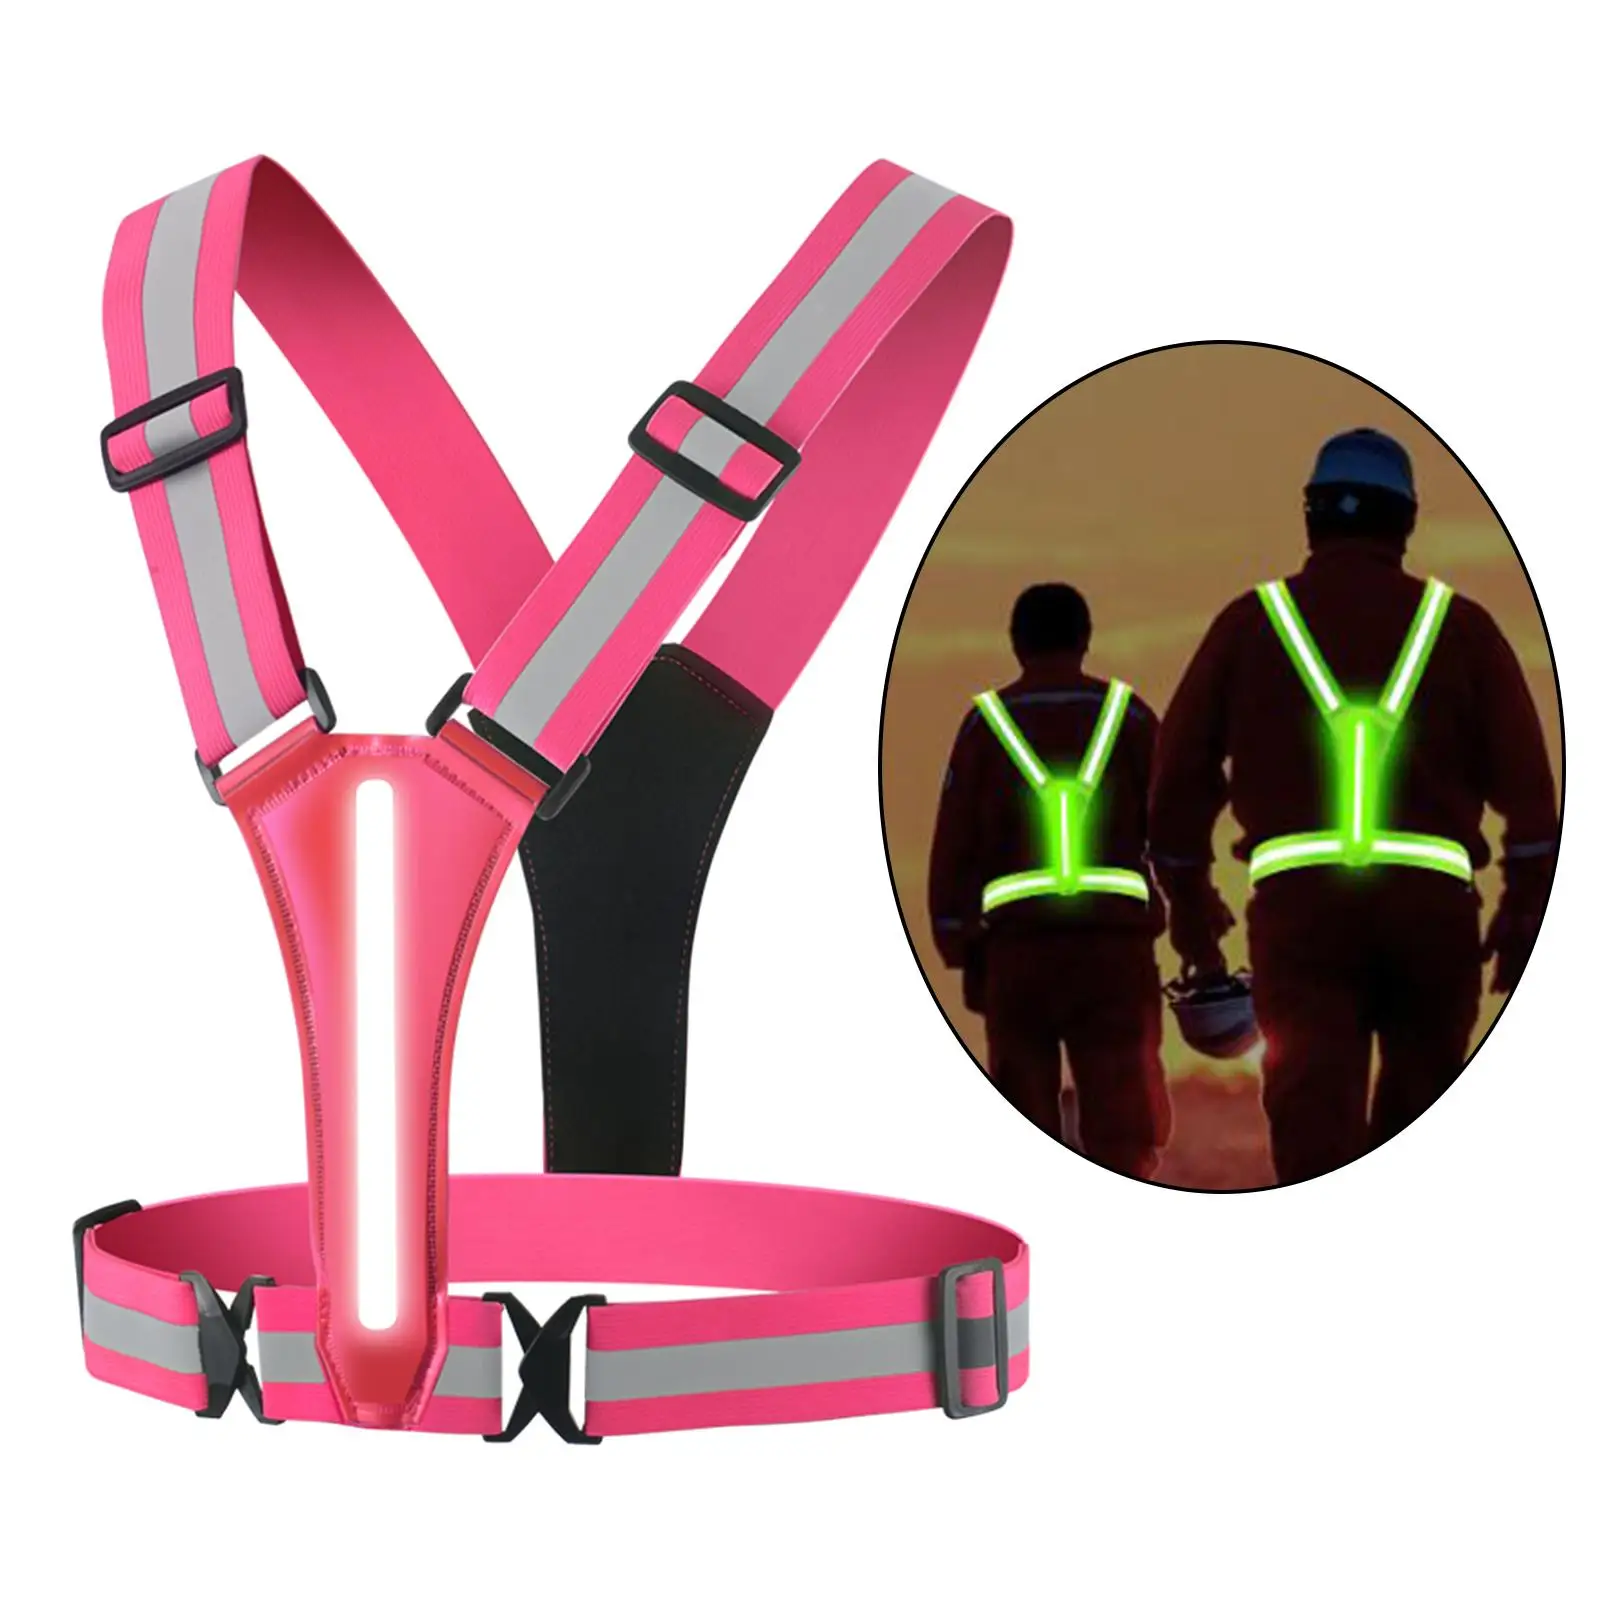 LED Reflective Vest Adjustable USB Rechargeable 3 Lighting Modes Night Running Gear for Cycling Motorcycling Men Women Runners